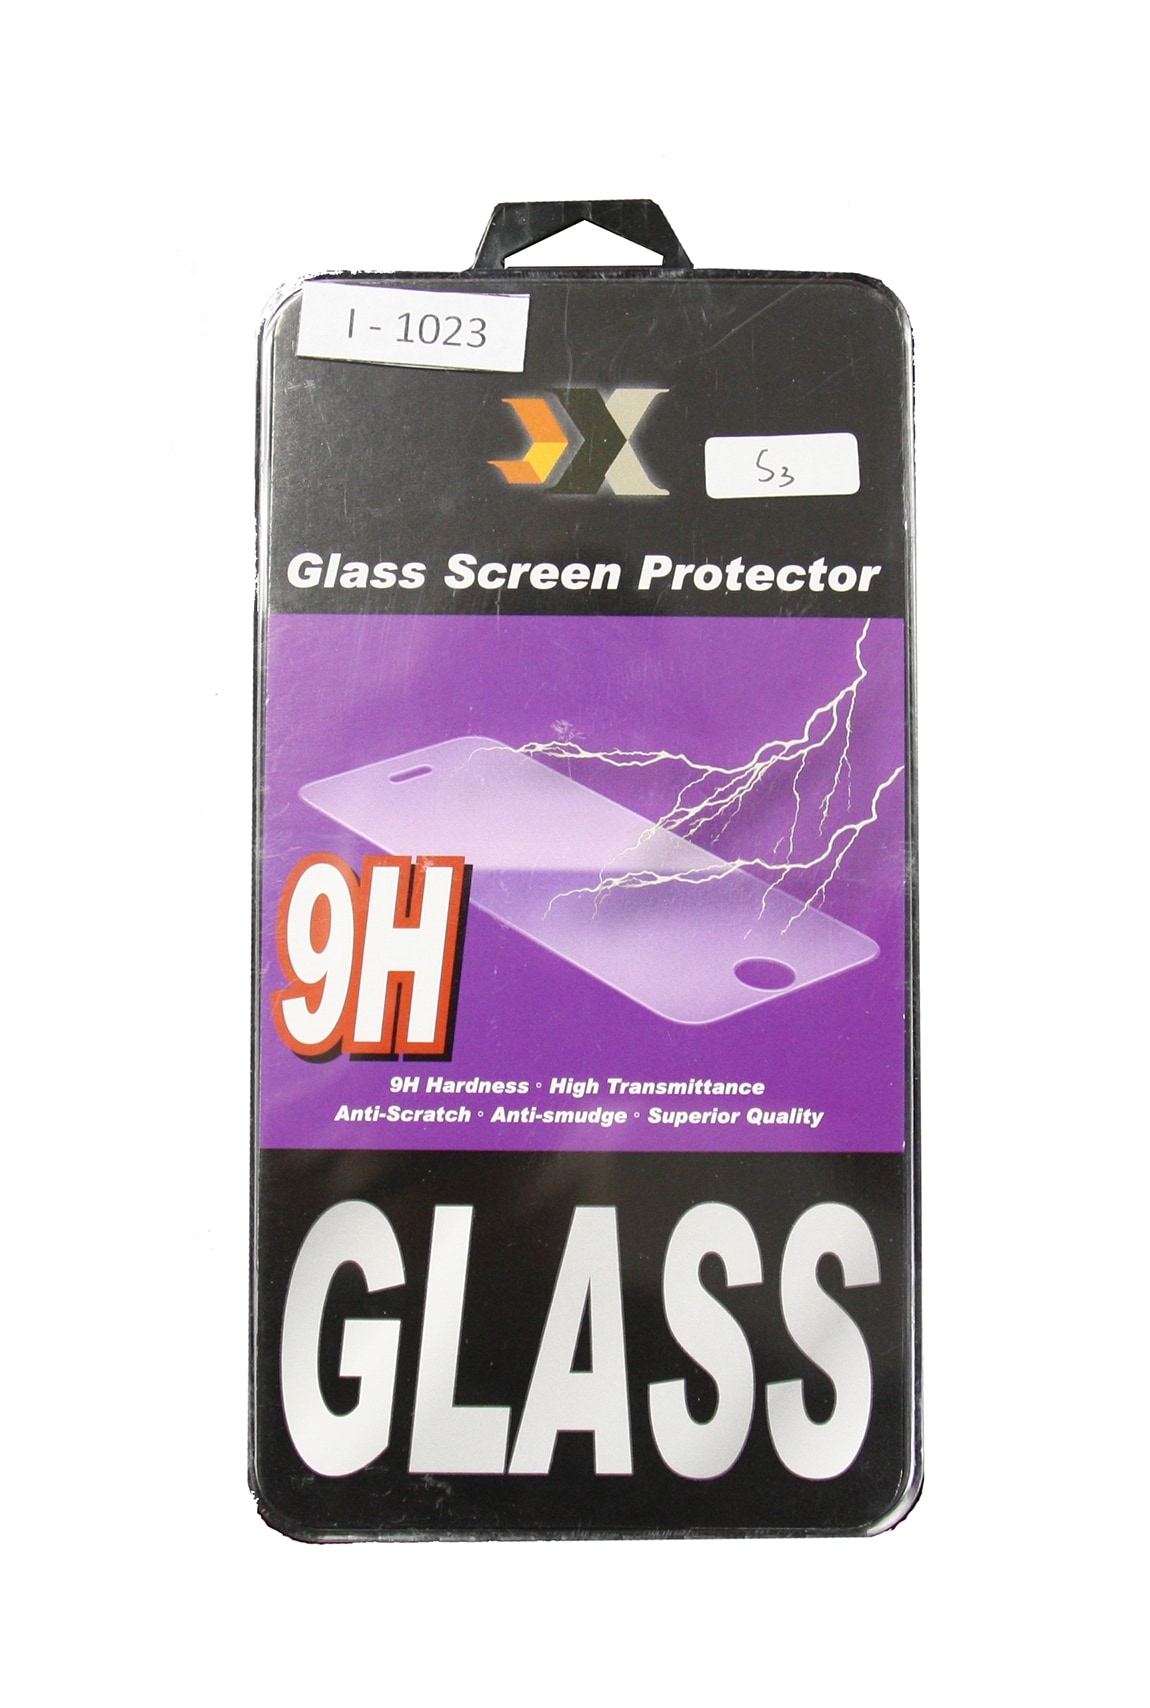 ORE International Sam-S3 Glass Screen Protector - Bubble Free & Sensitive Touch - Improve LCD Protection Film | I-1023 -  Ore Furniture